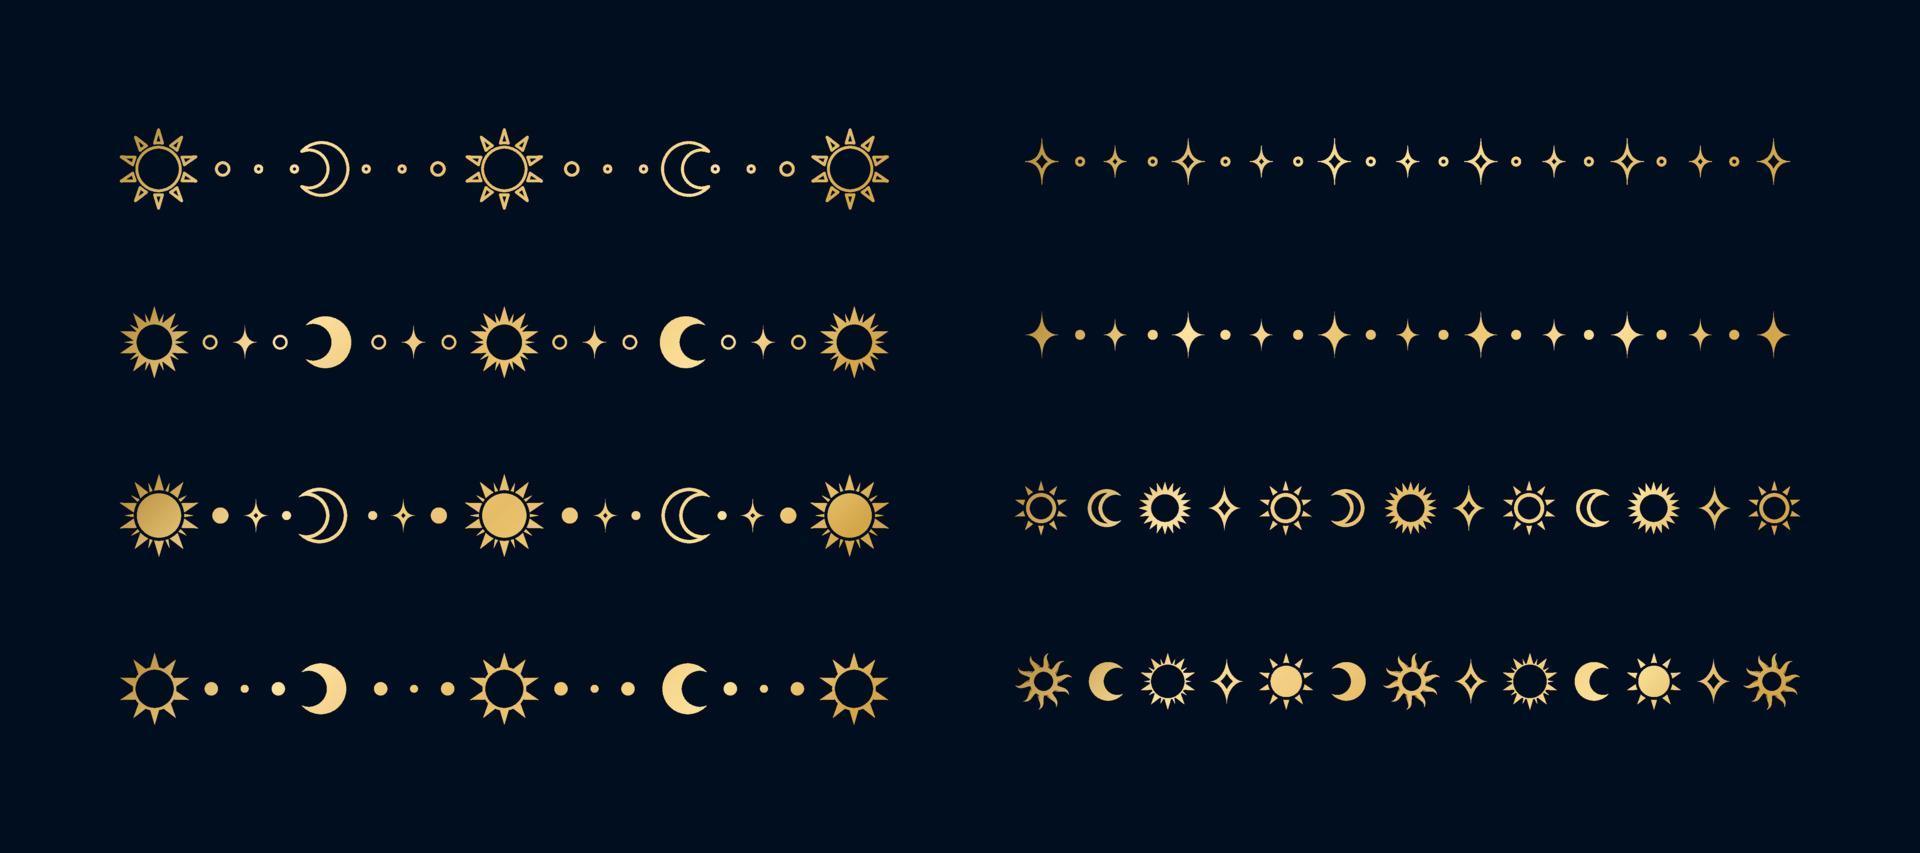 Gold celestial separator set with sun, stars, moon phases, crescents. Ornate boho mystic divider decorative element vector